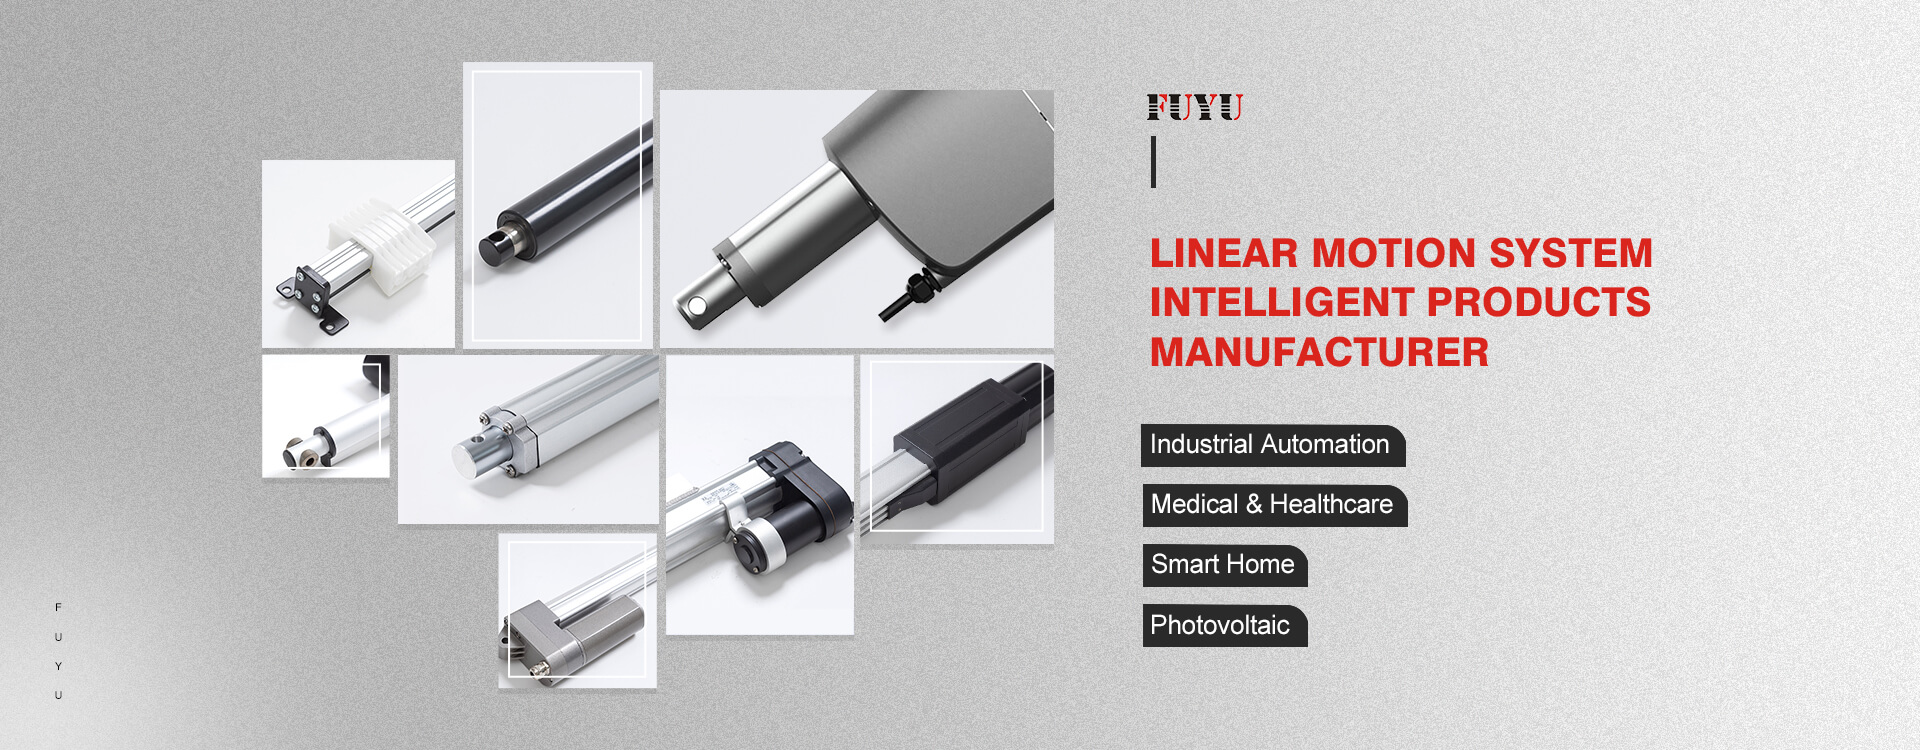 linear actuator industry solution